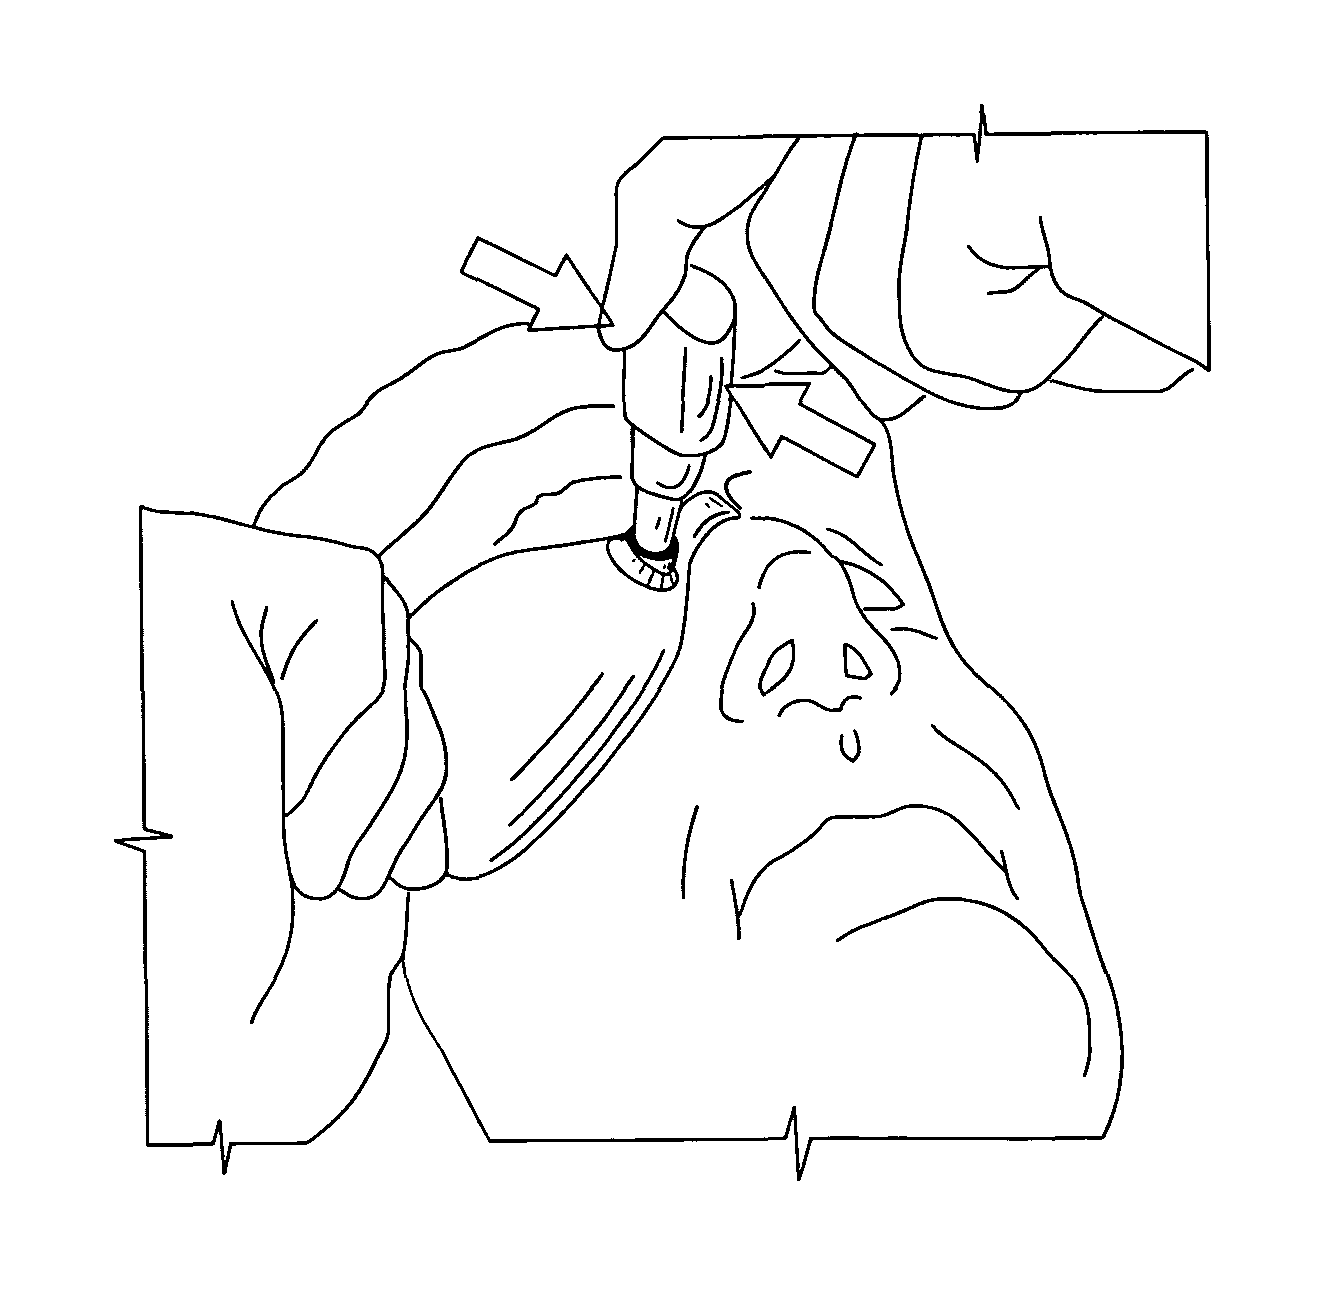 Device for administering eye drops